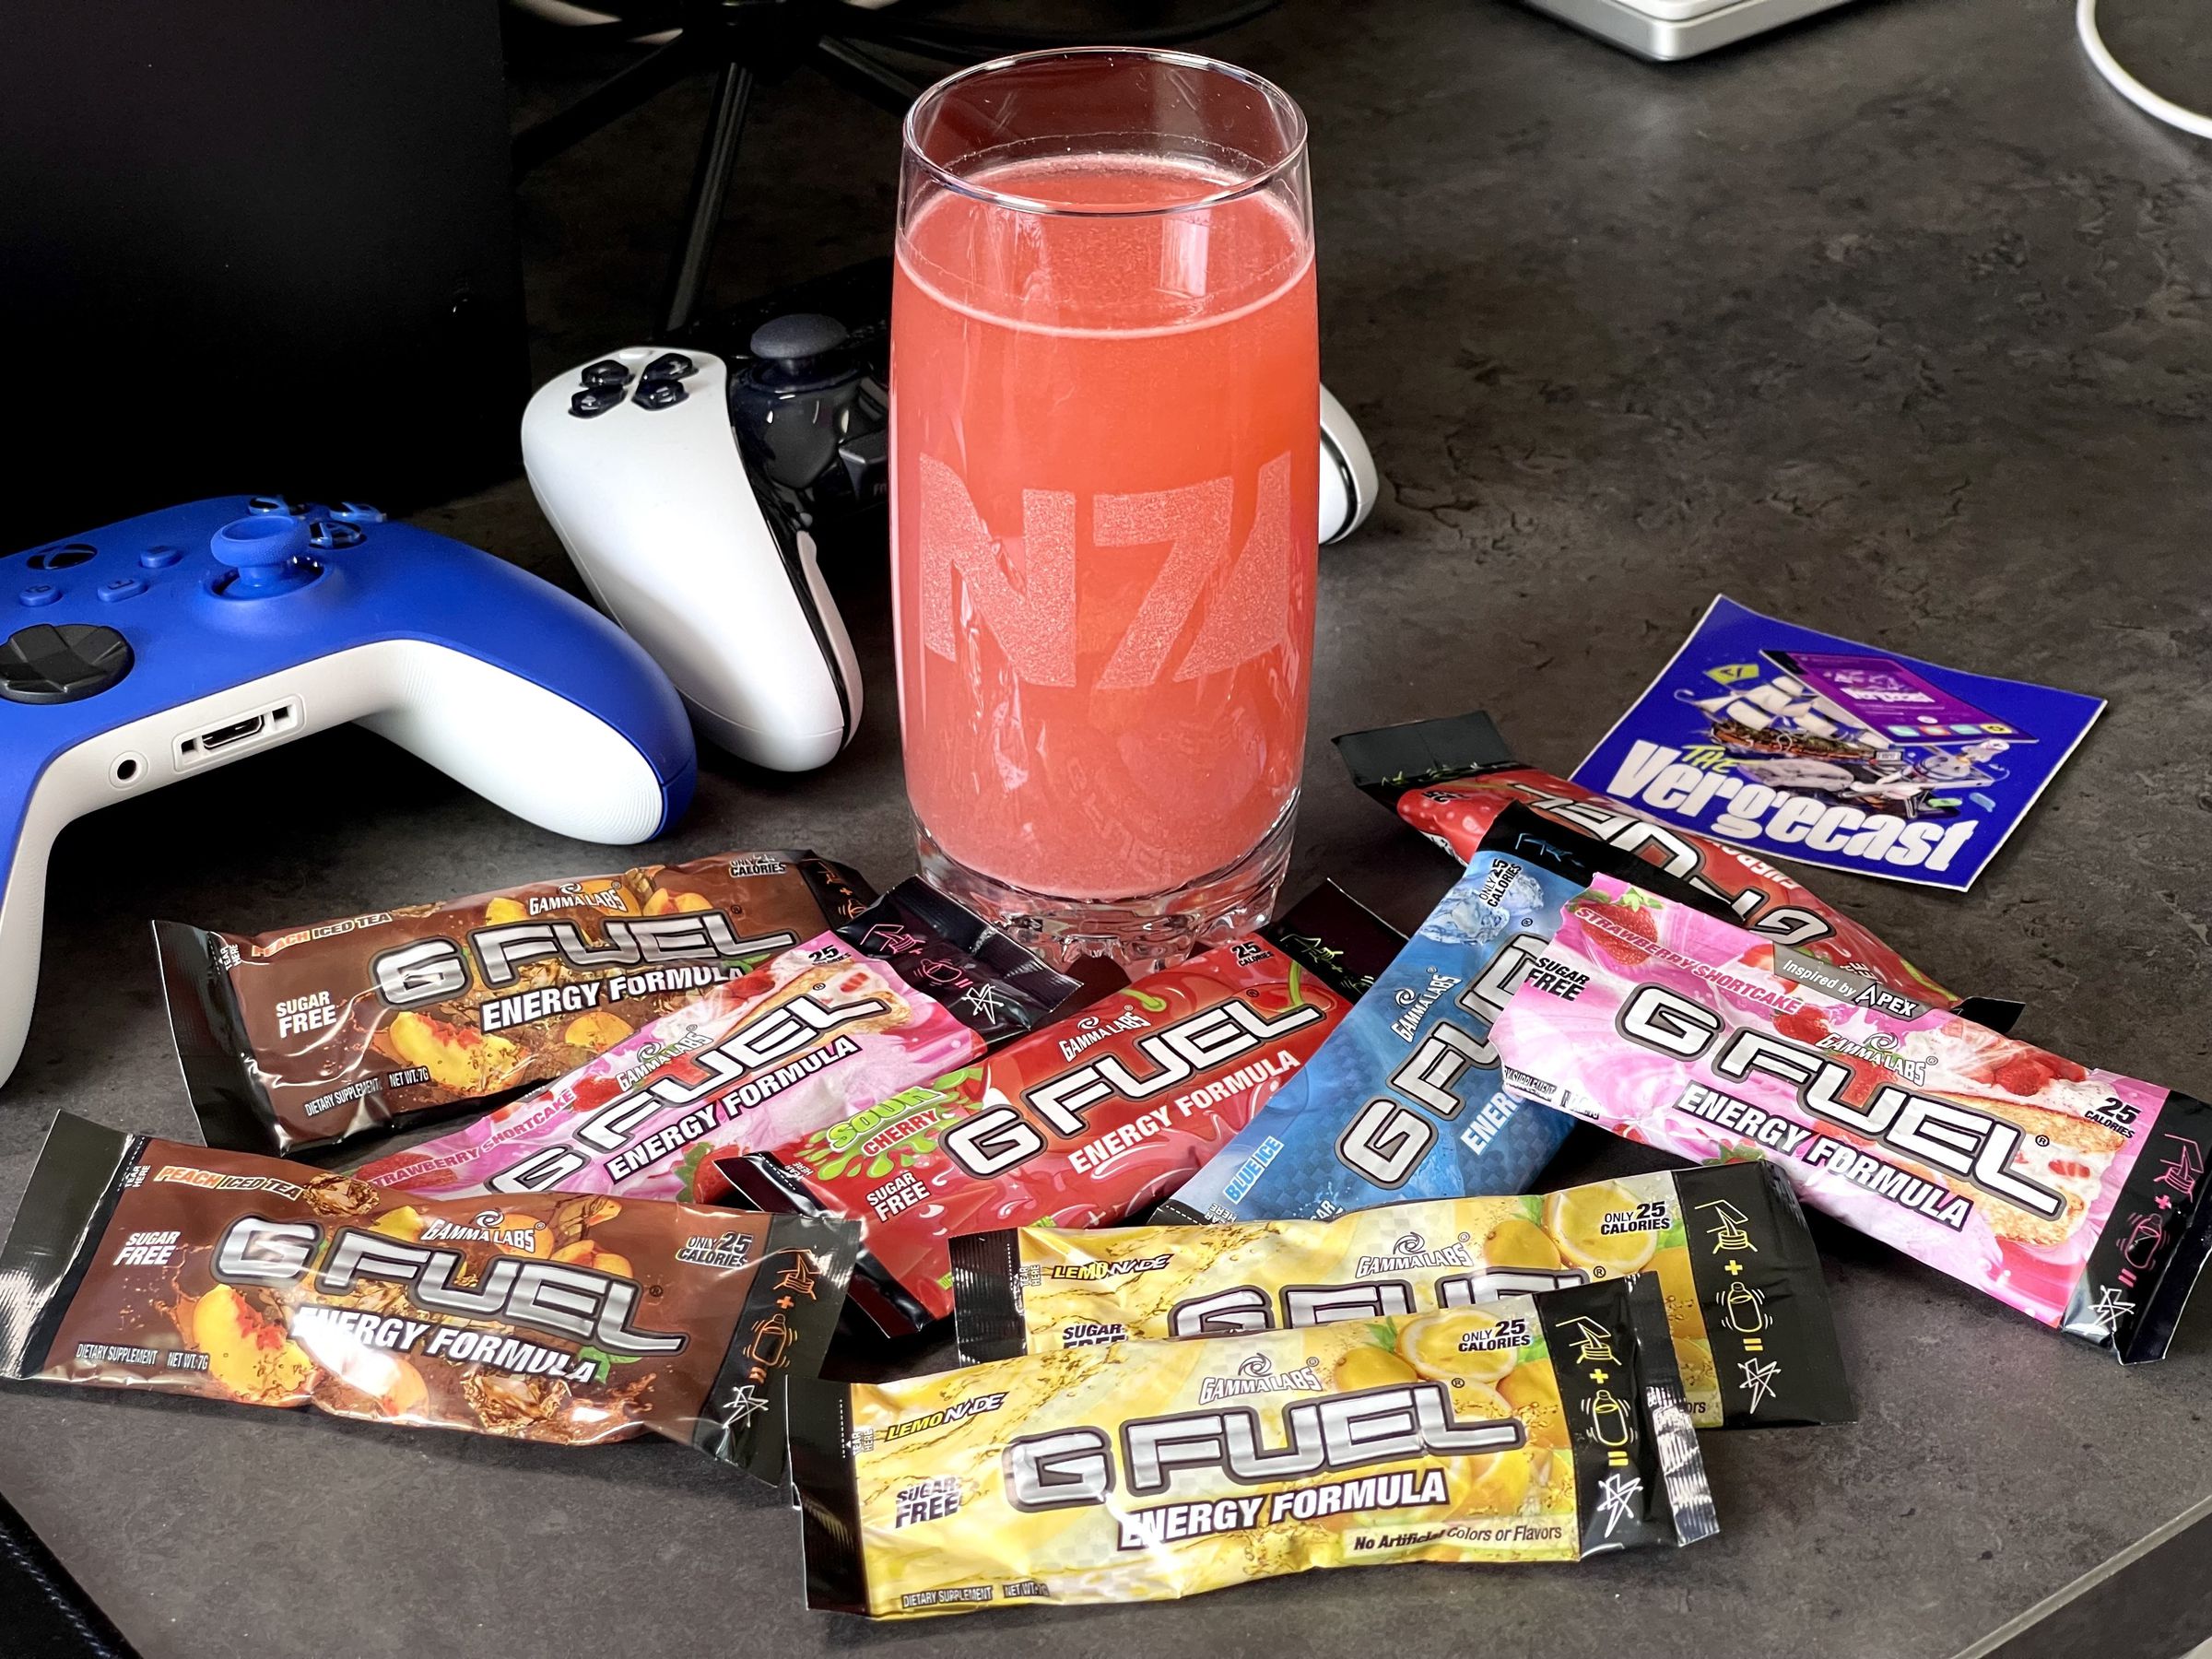 A regretful pile of G Fuel energy drink powders on a desk with a mixed glass of the cursed substance. It looks like the desk of a sad existence.